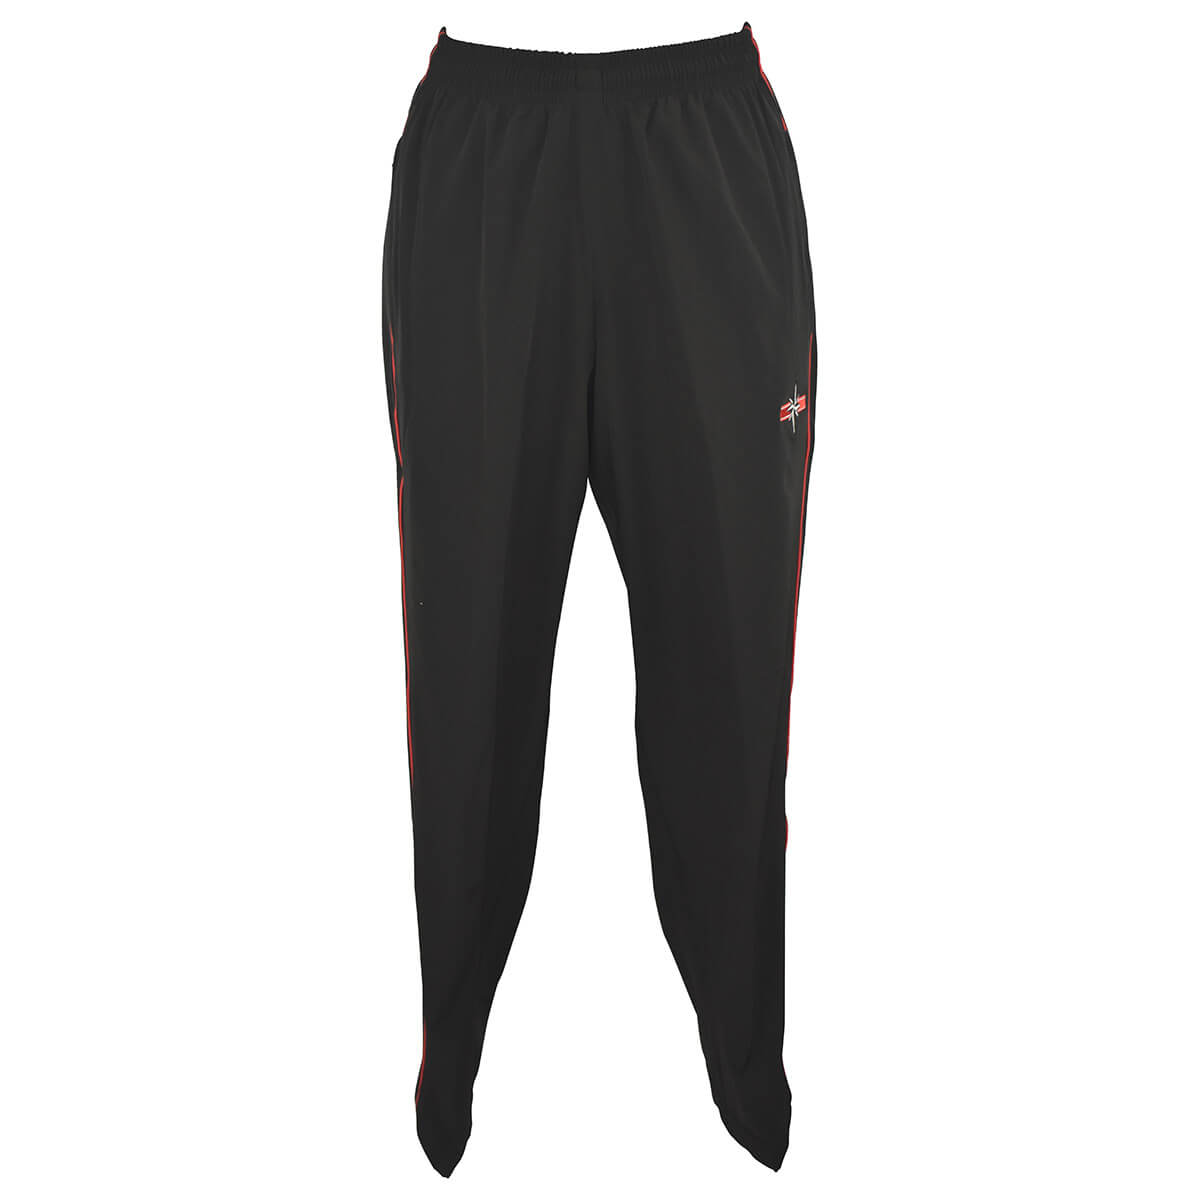 North Geelong Track Pants | North Geelong Secondary College | Noone